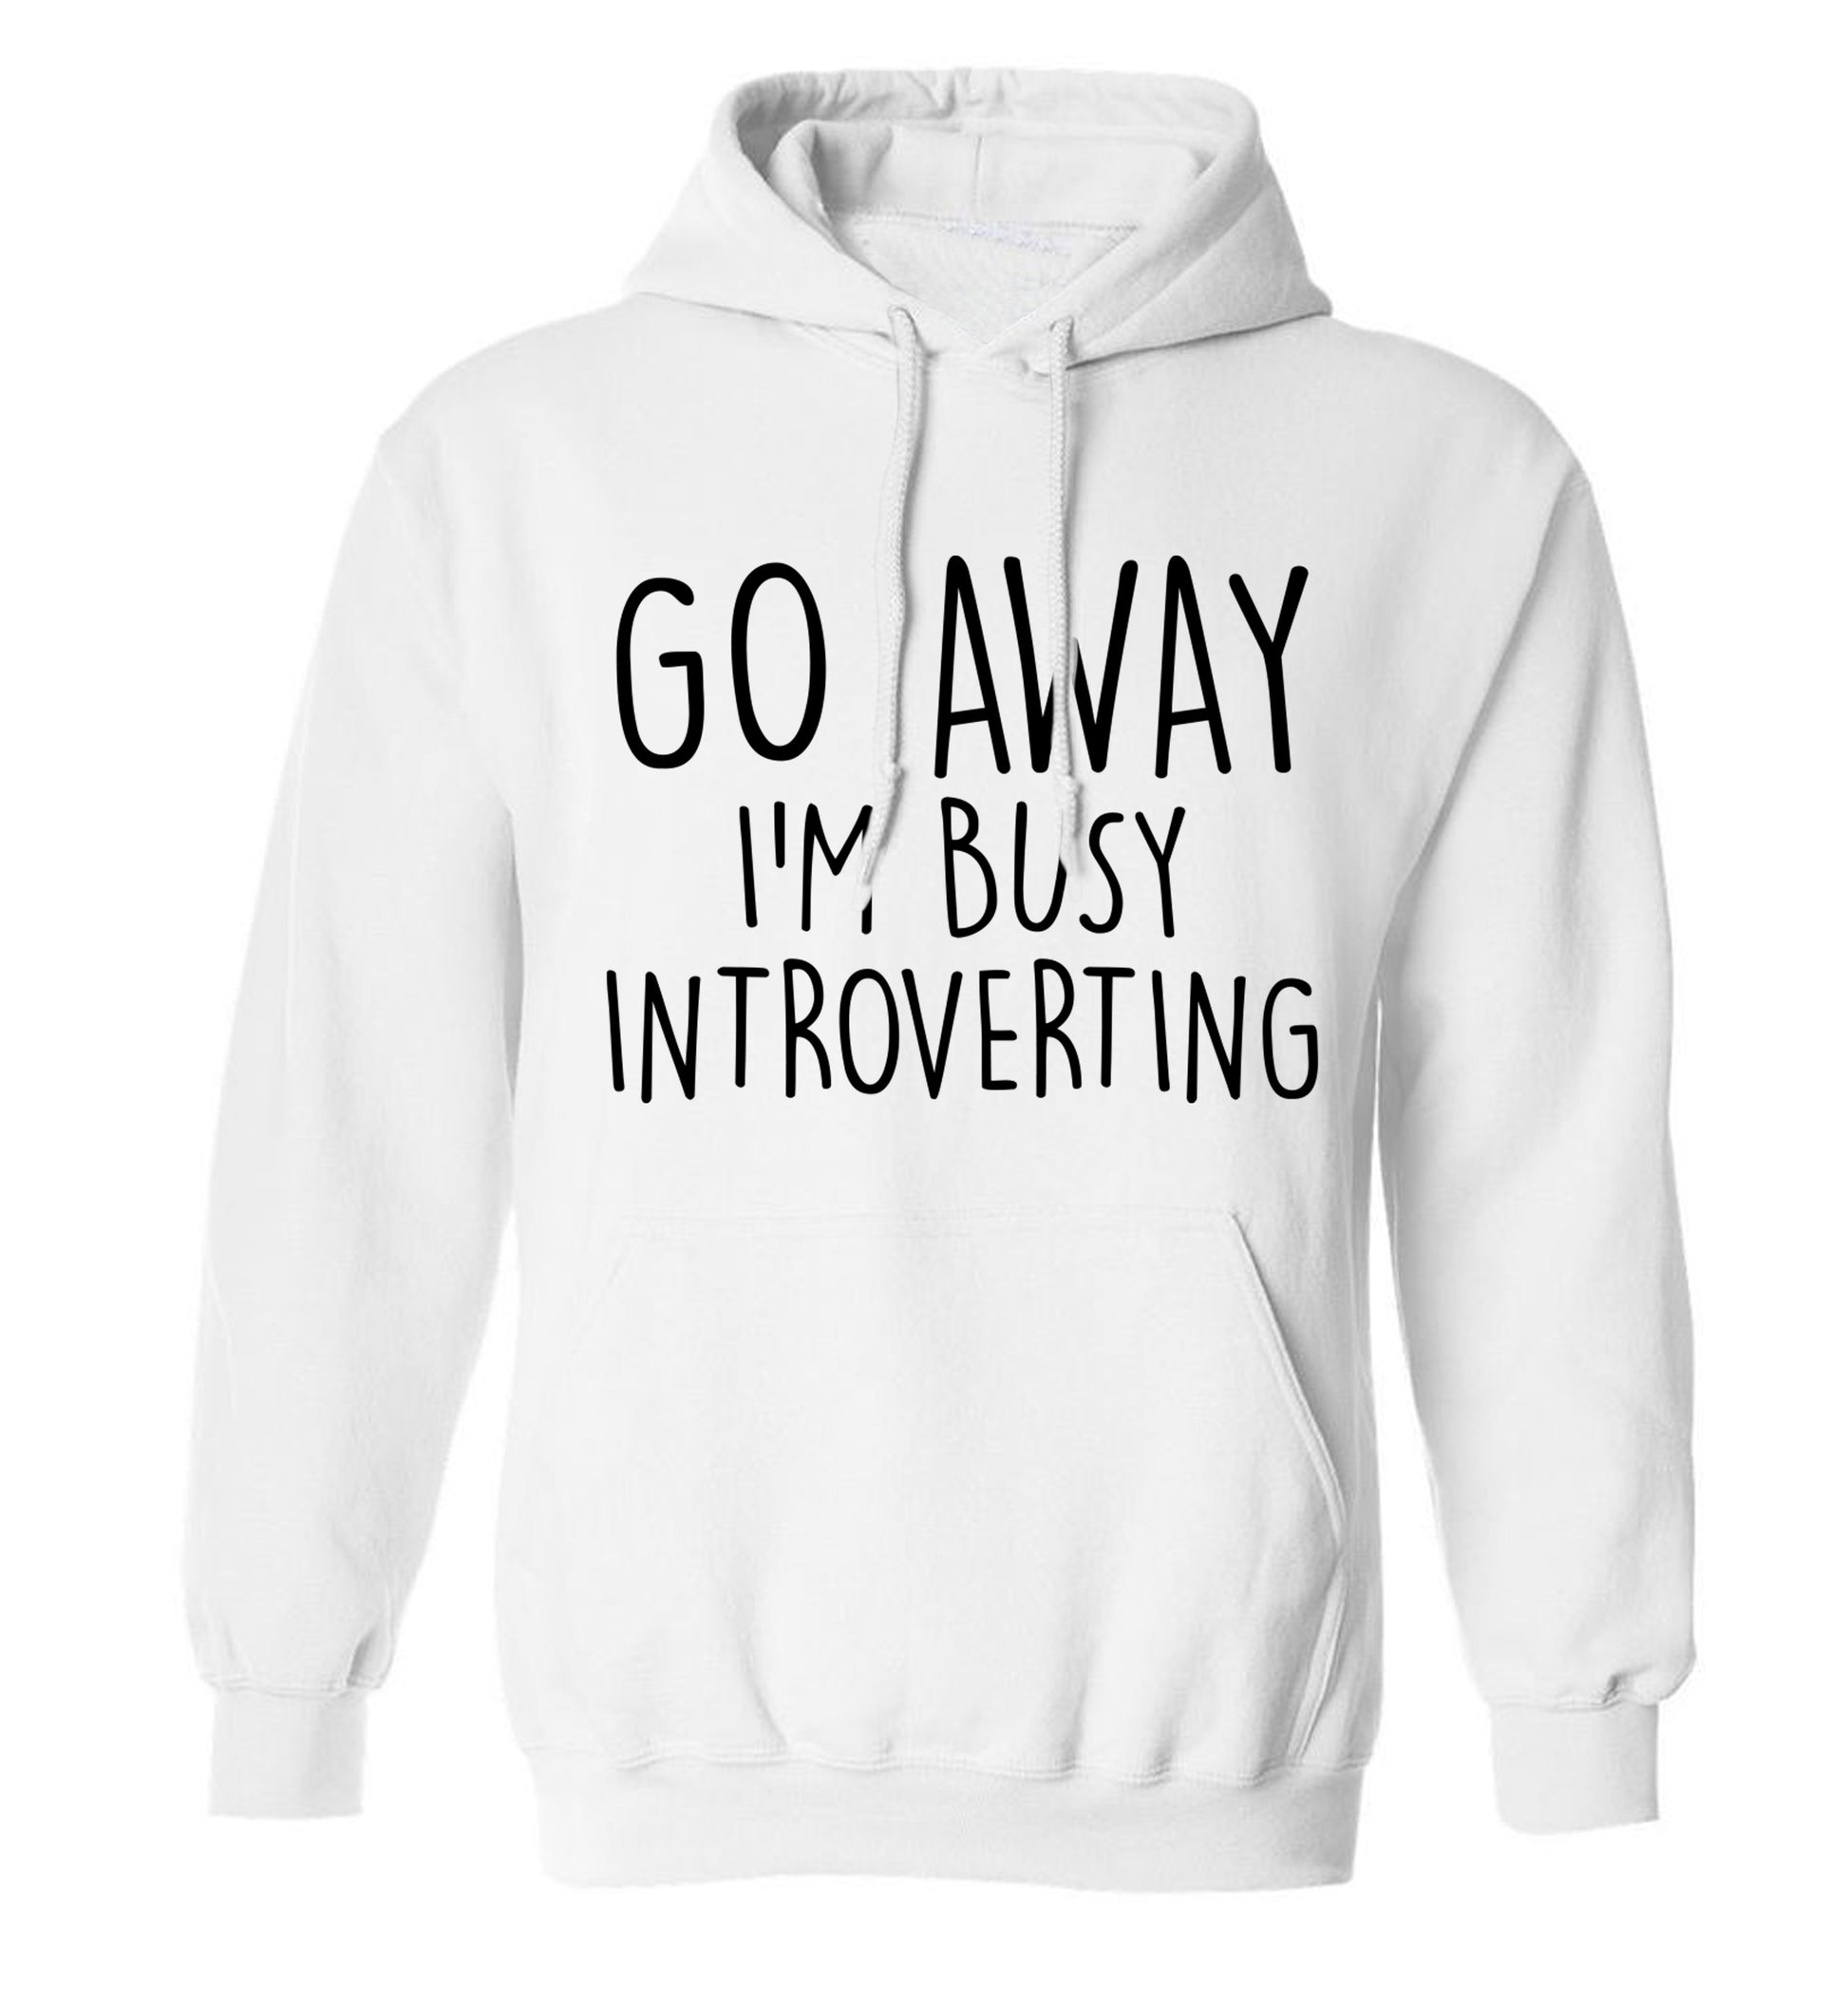 Go away I'm busy introverting adults unisex white hoodie 2XL